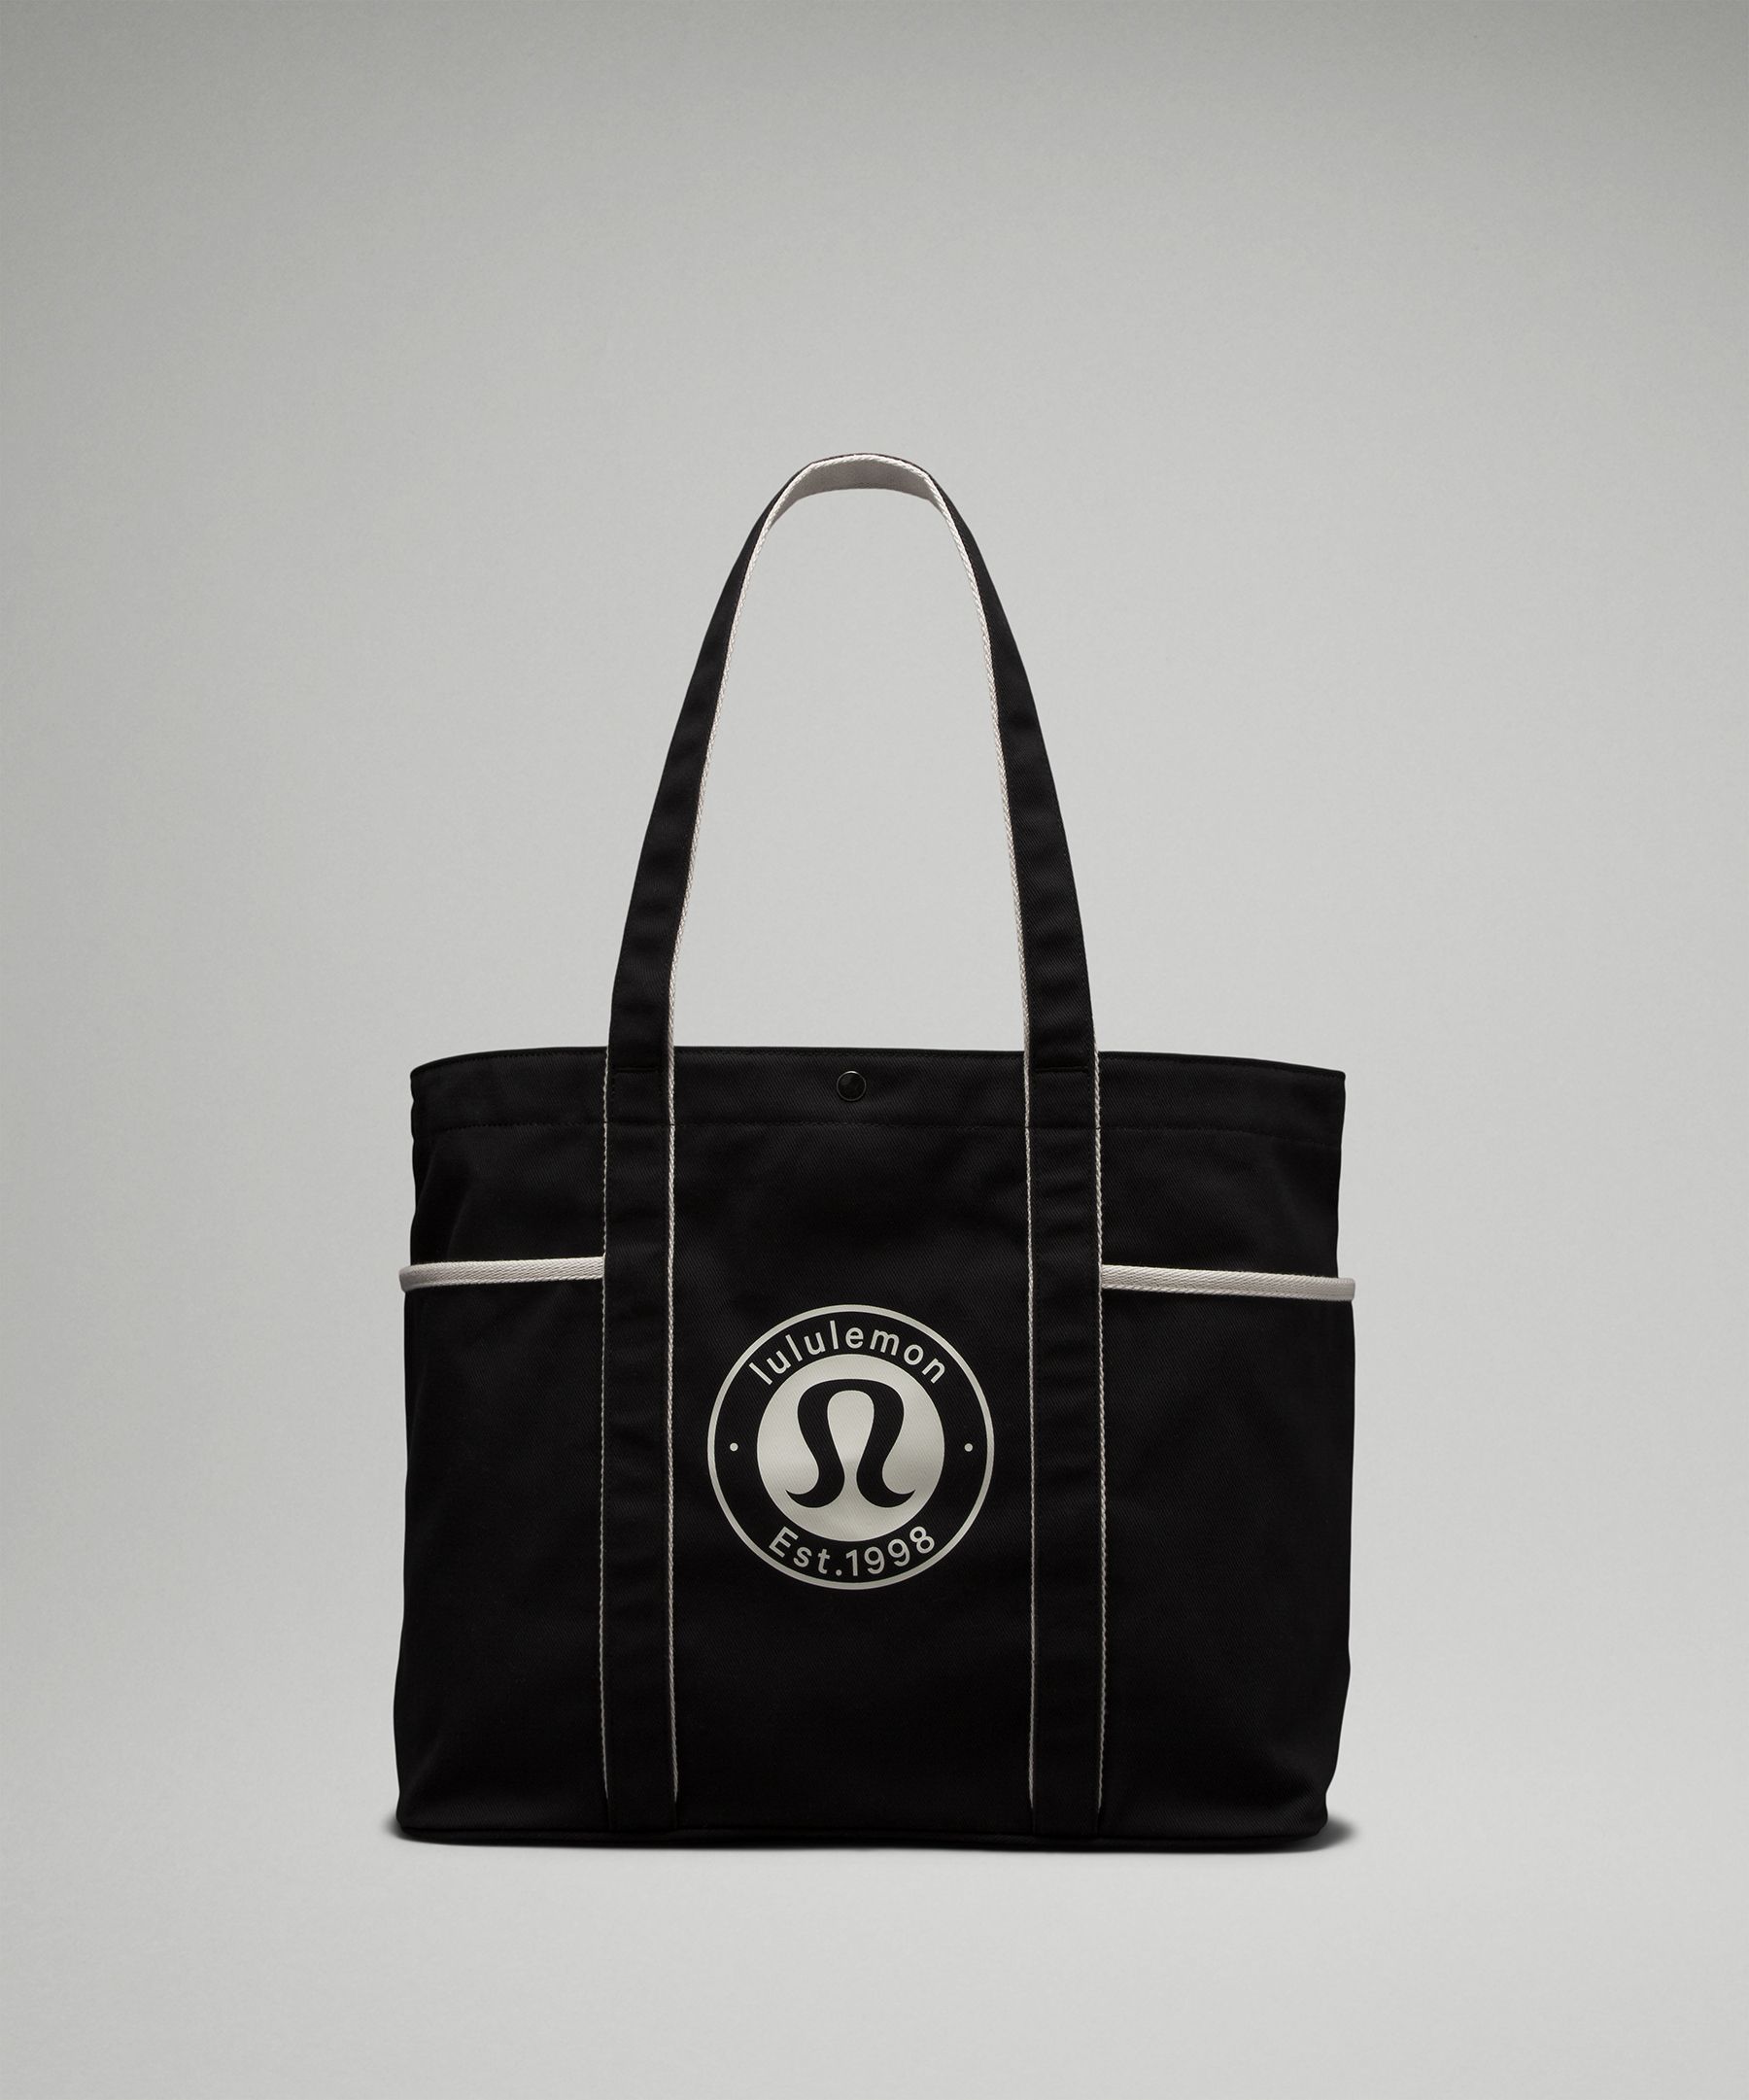 Lululemon Cross It Off Tote Bag 20L Purse Tote Black New with Tags